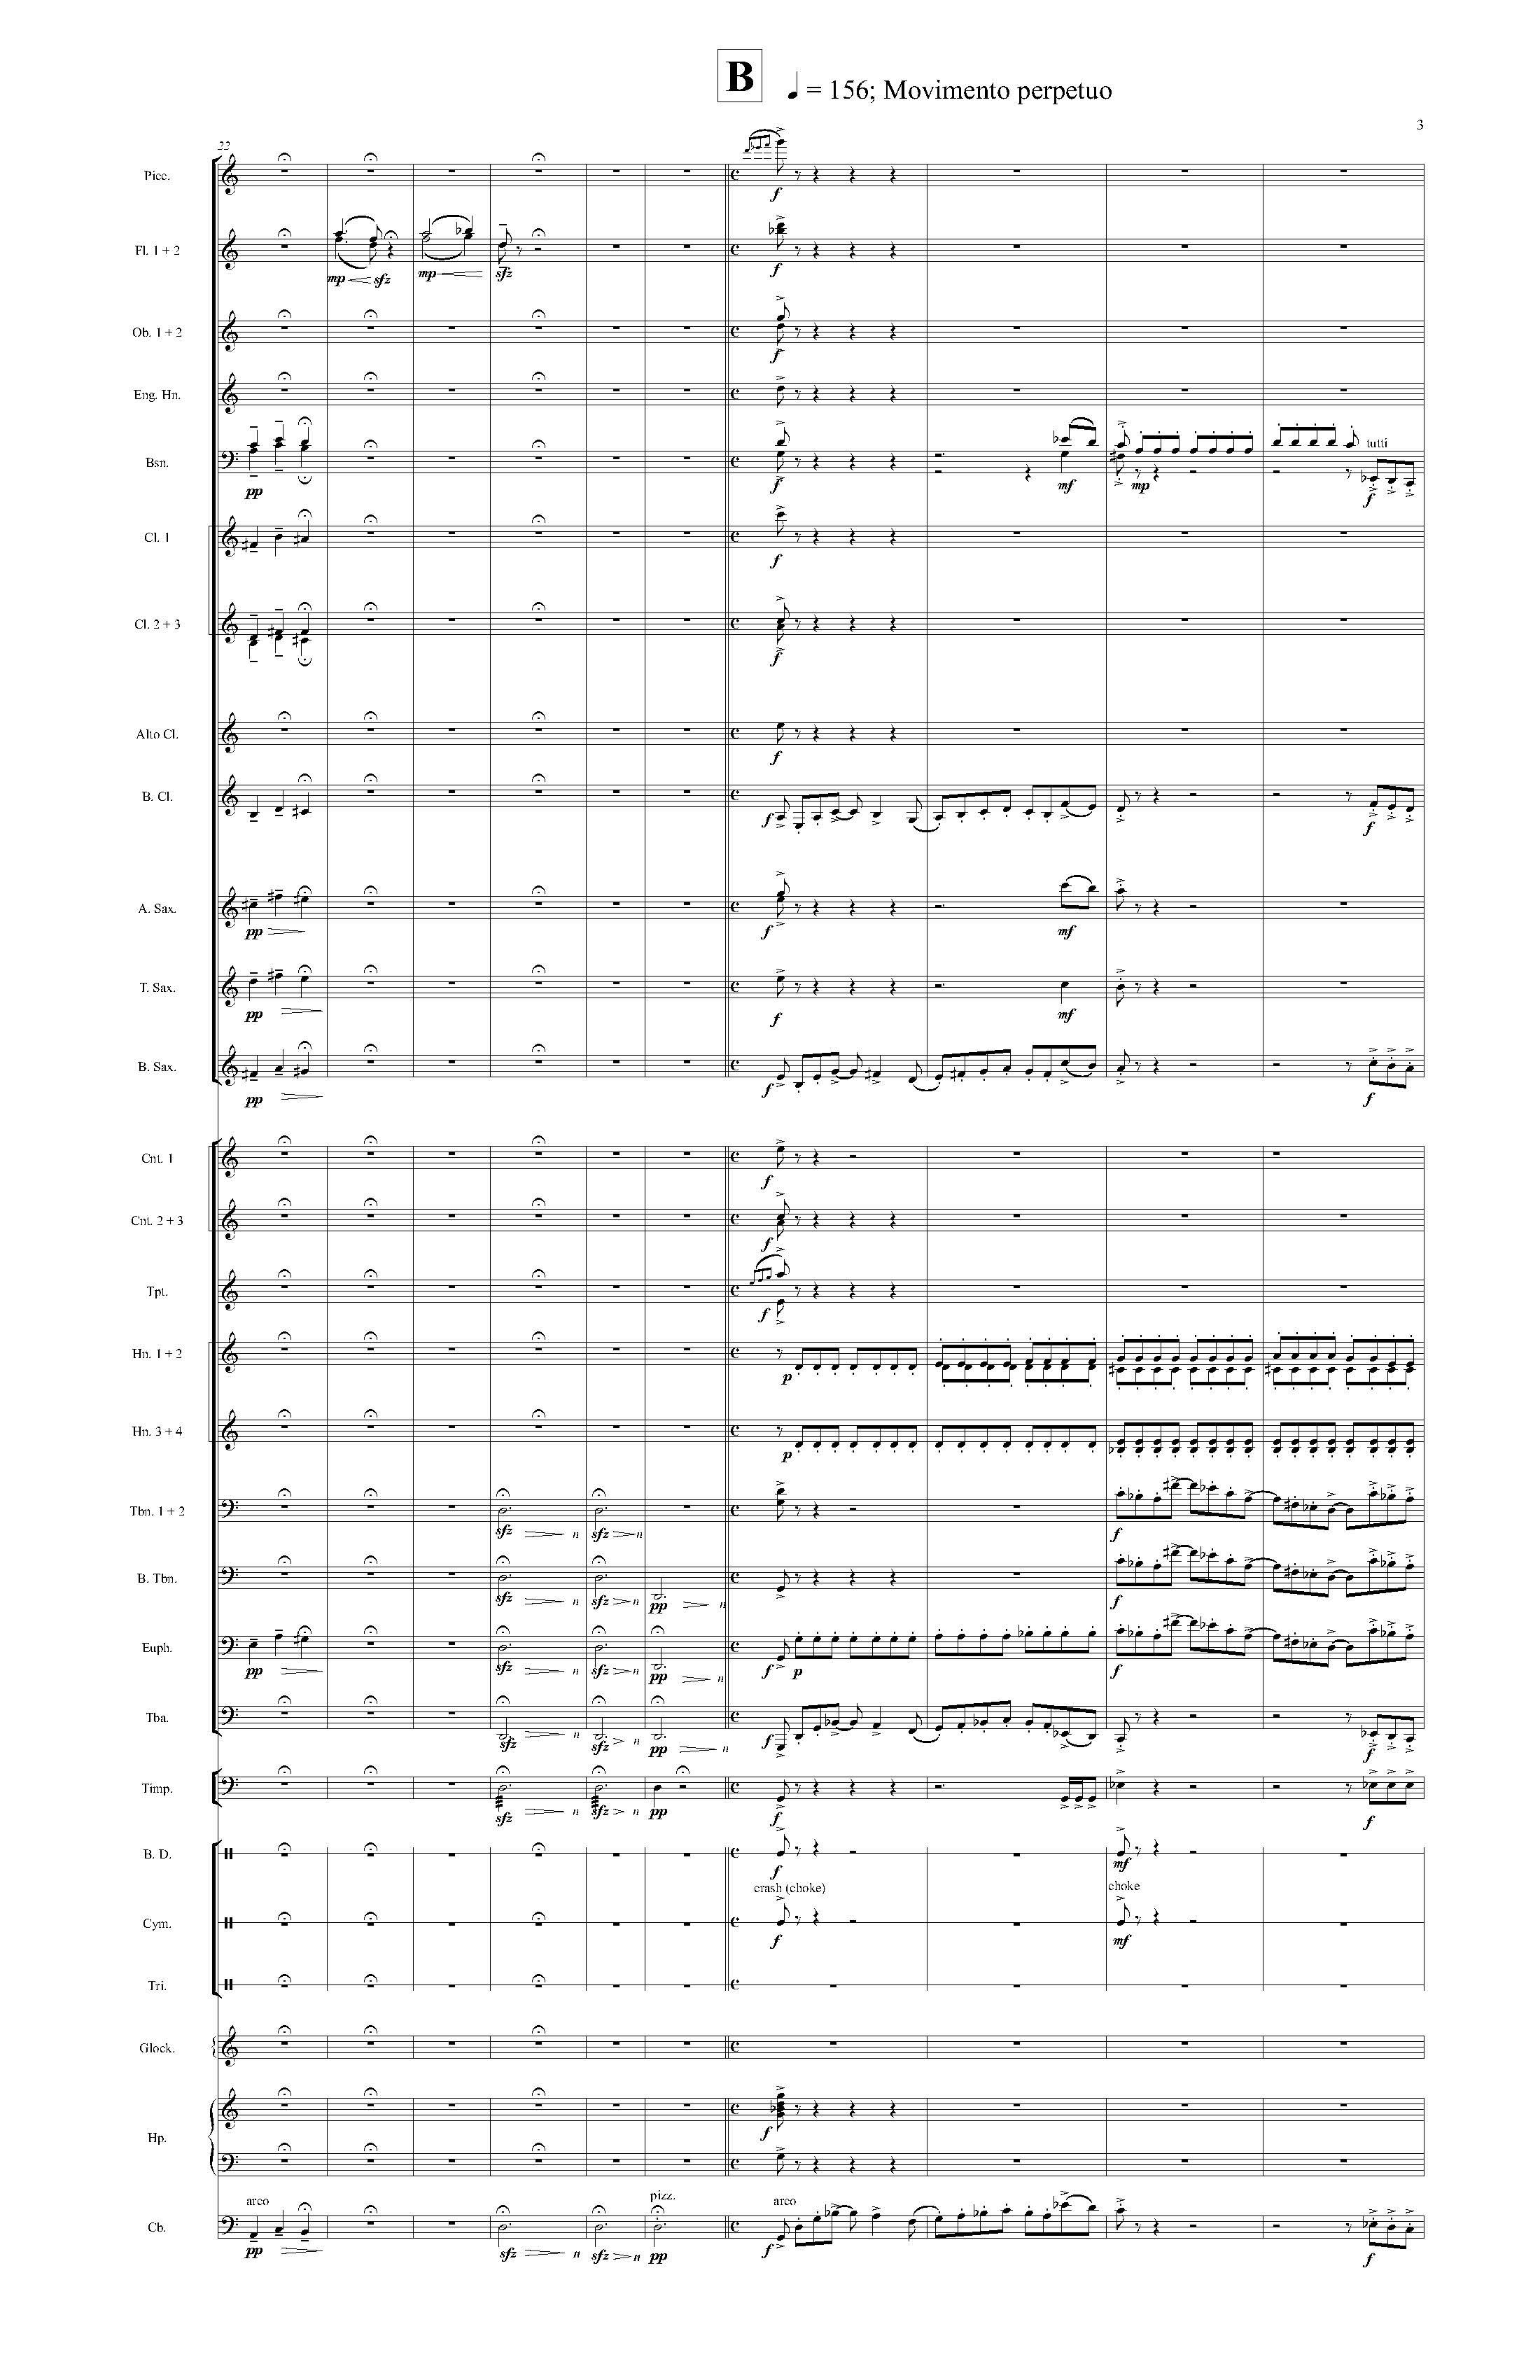 Psyche - Complete Score_Page_09.jpg